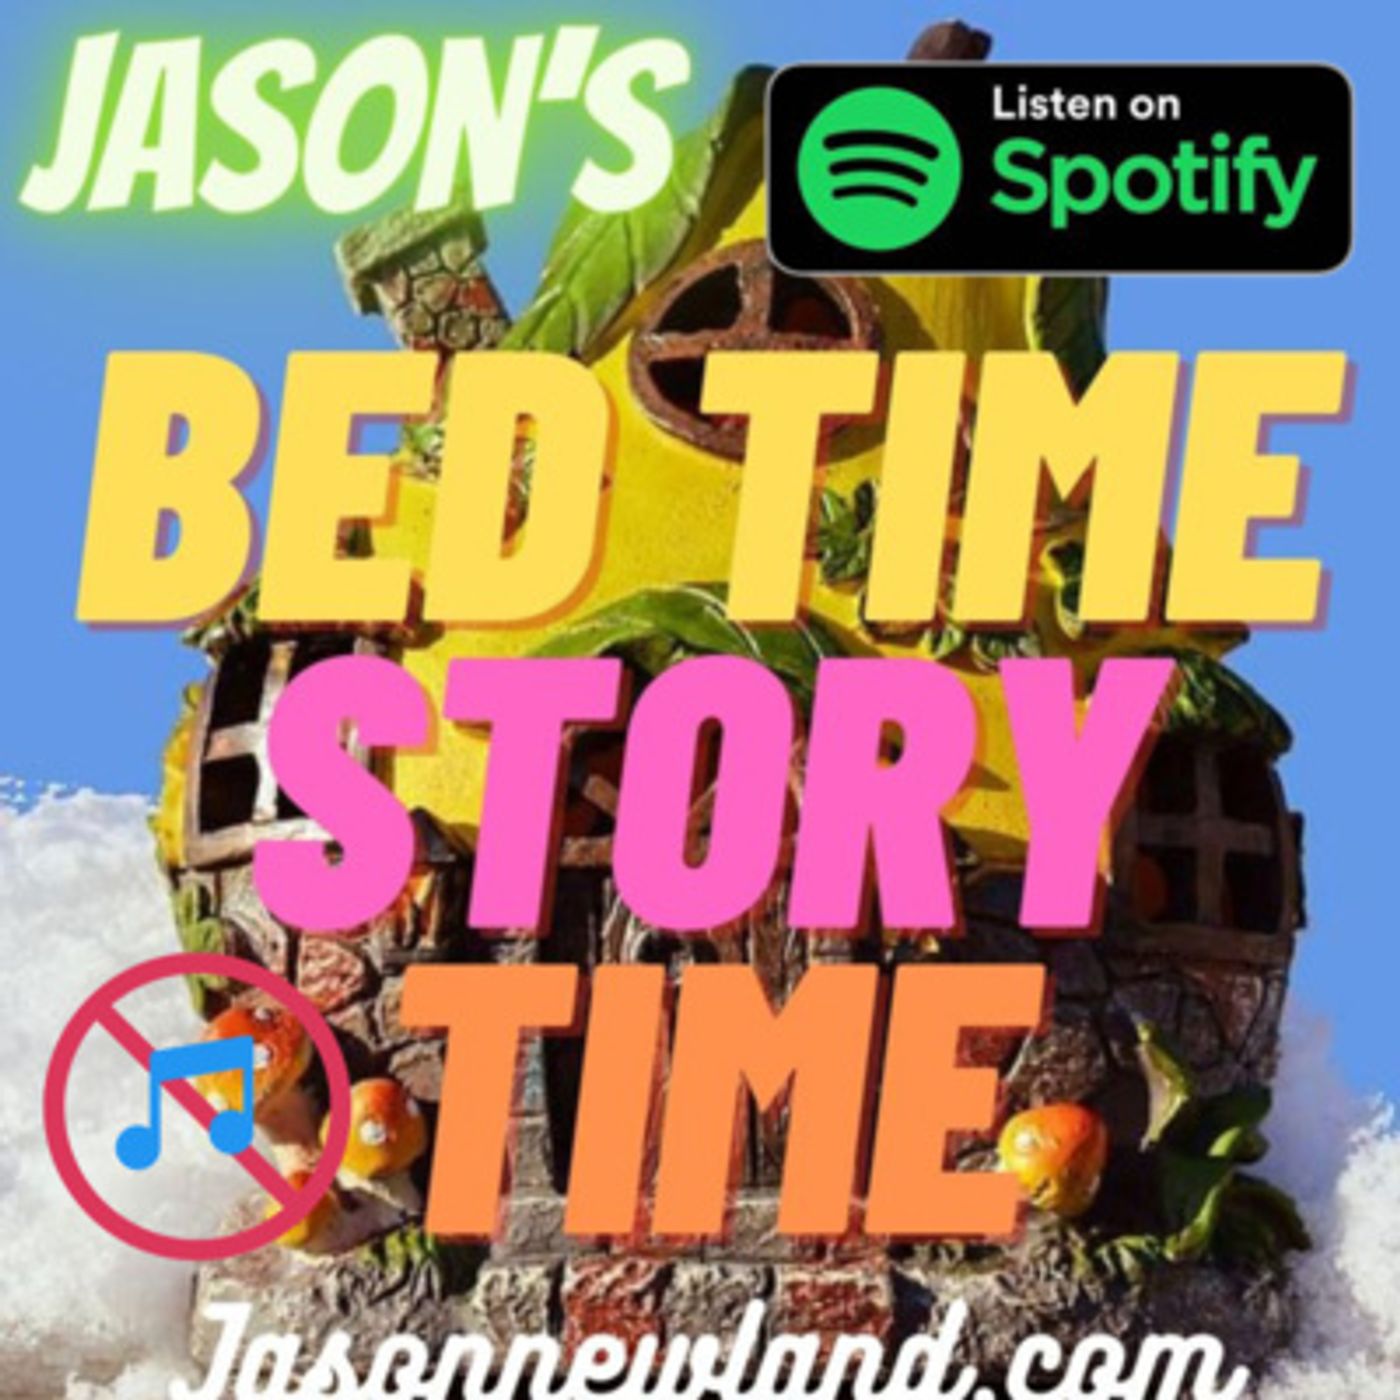 #17 PENNY AND THE FARTY EYE - Jasons Bed Time Story Time